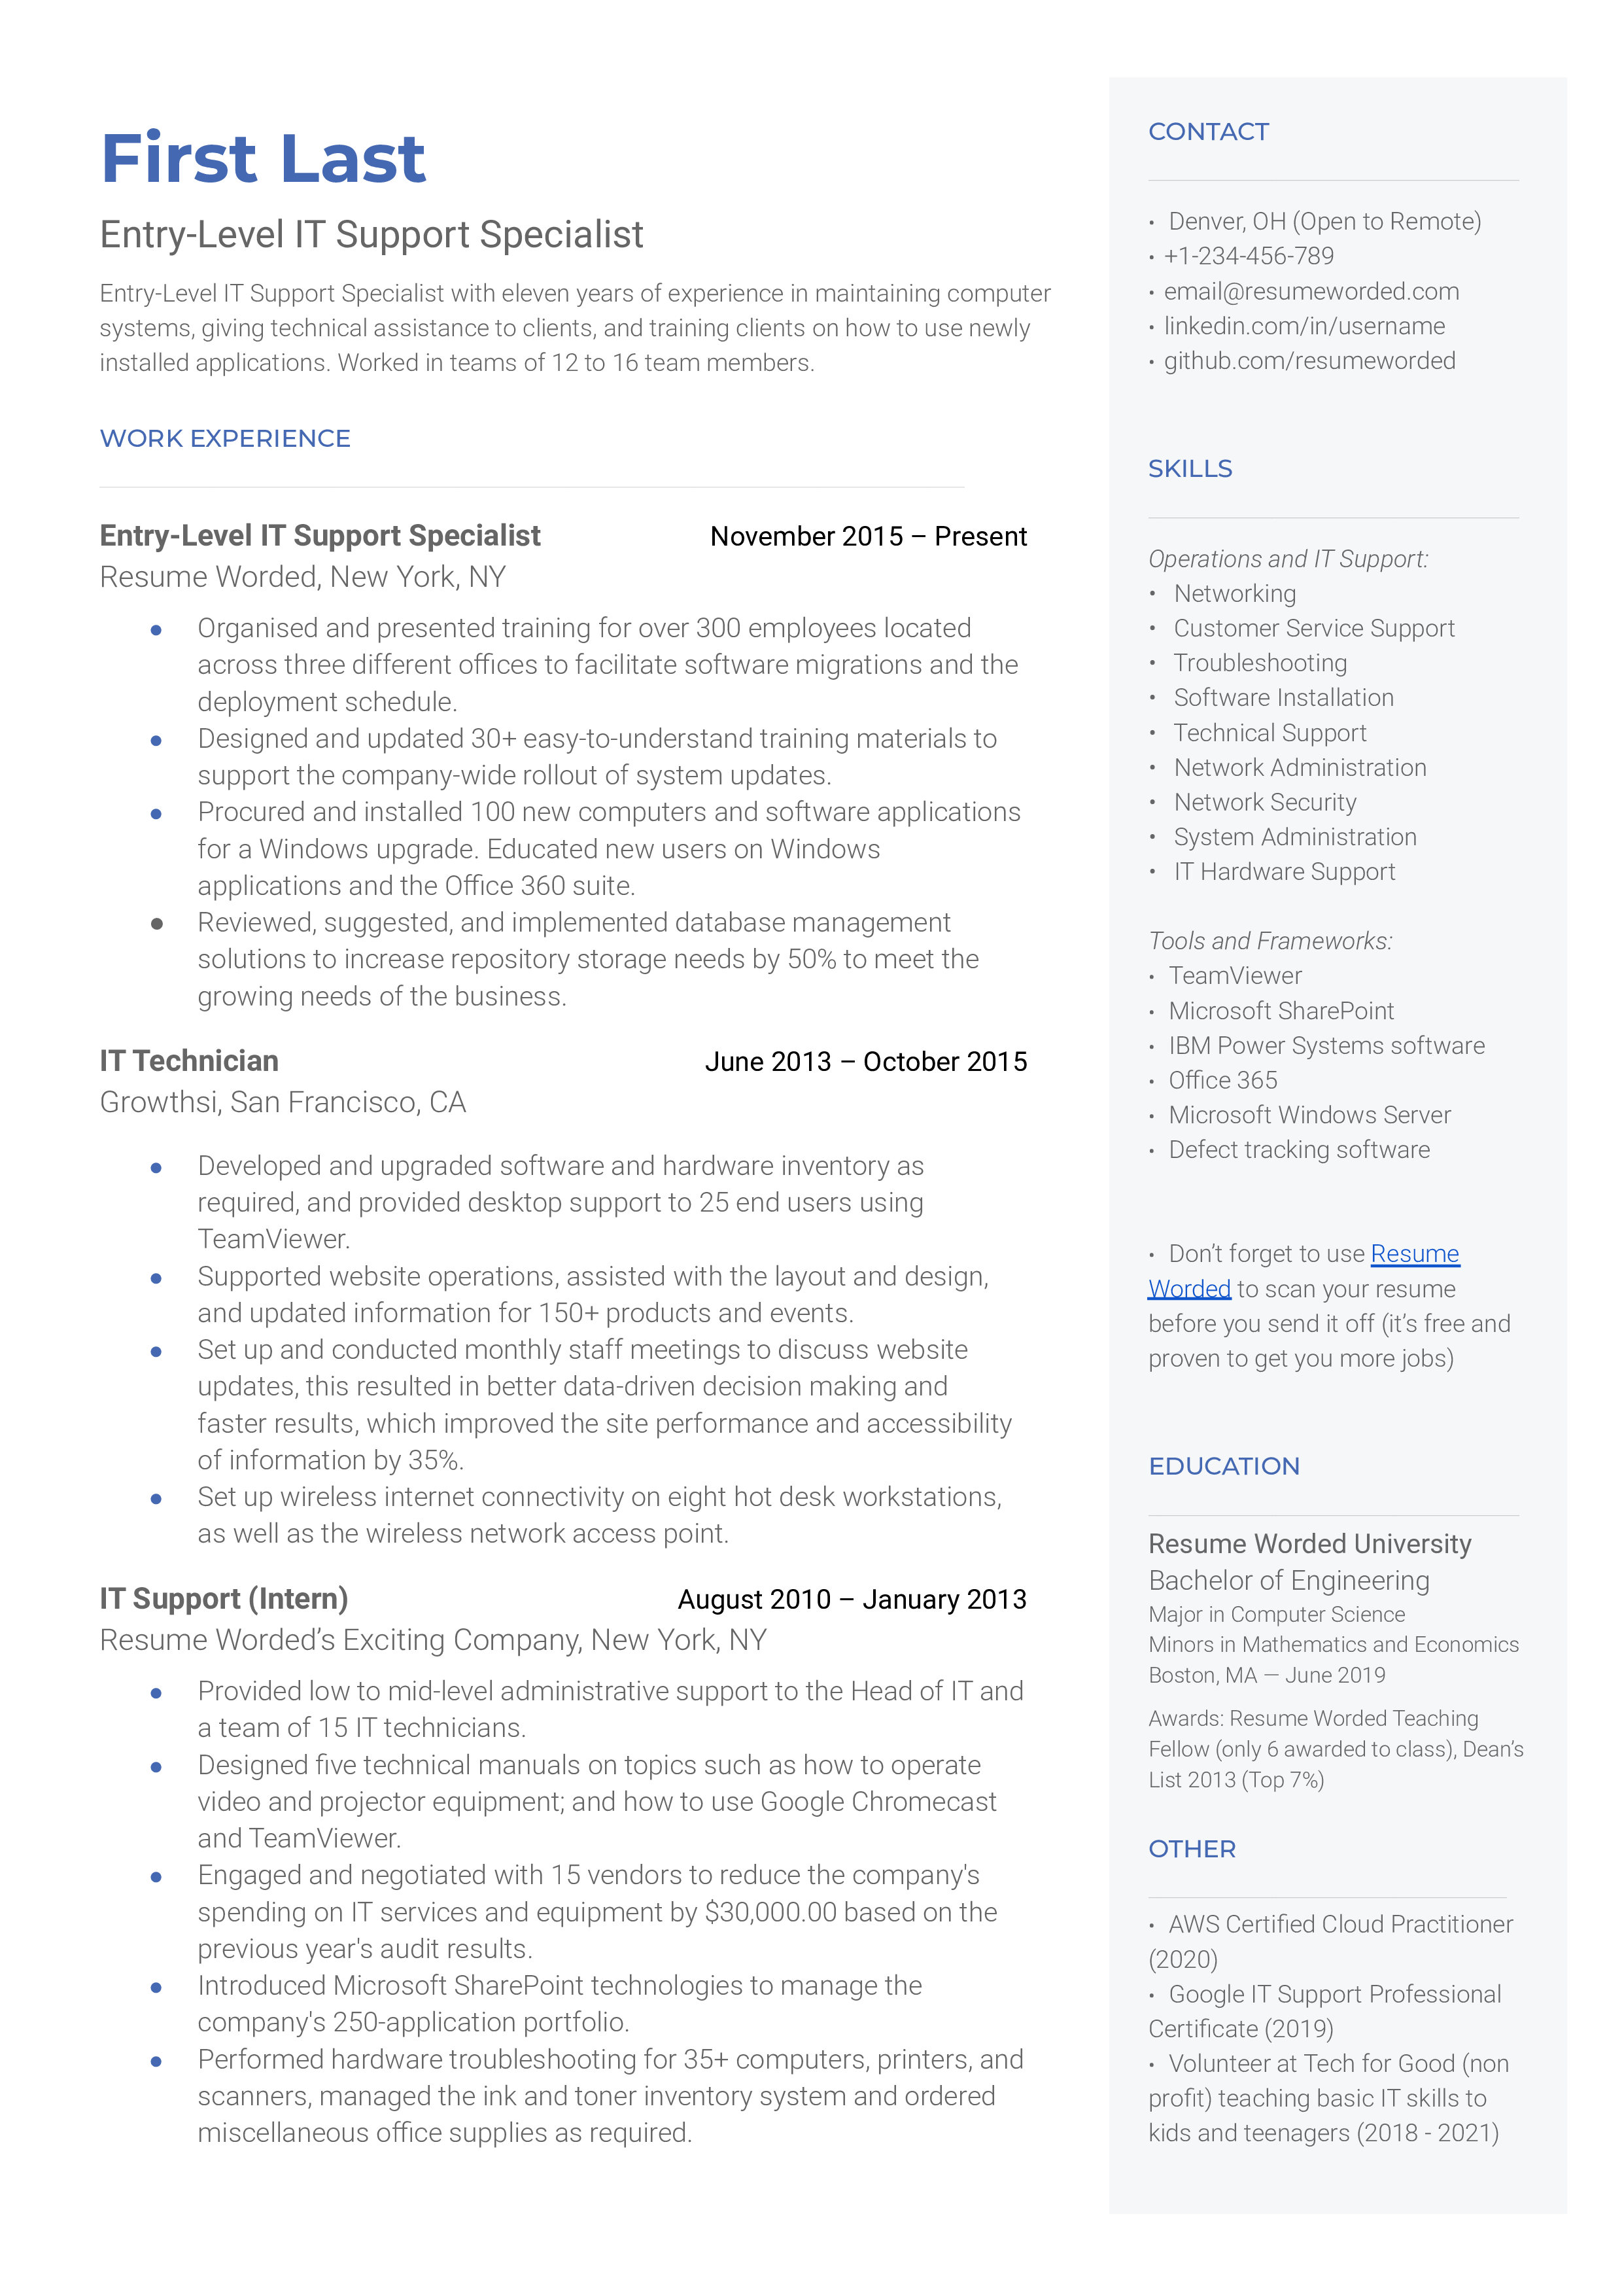 Entry-Level IT Support Specialist Resume Sample